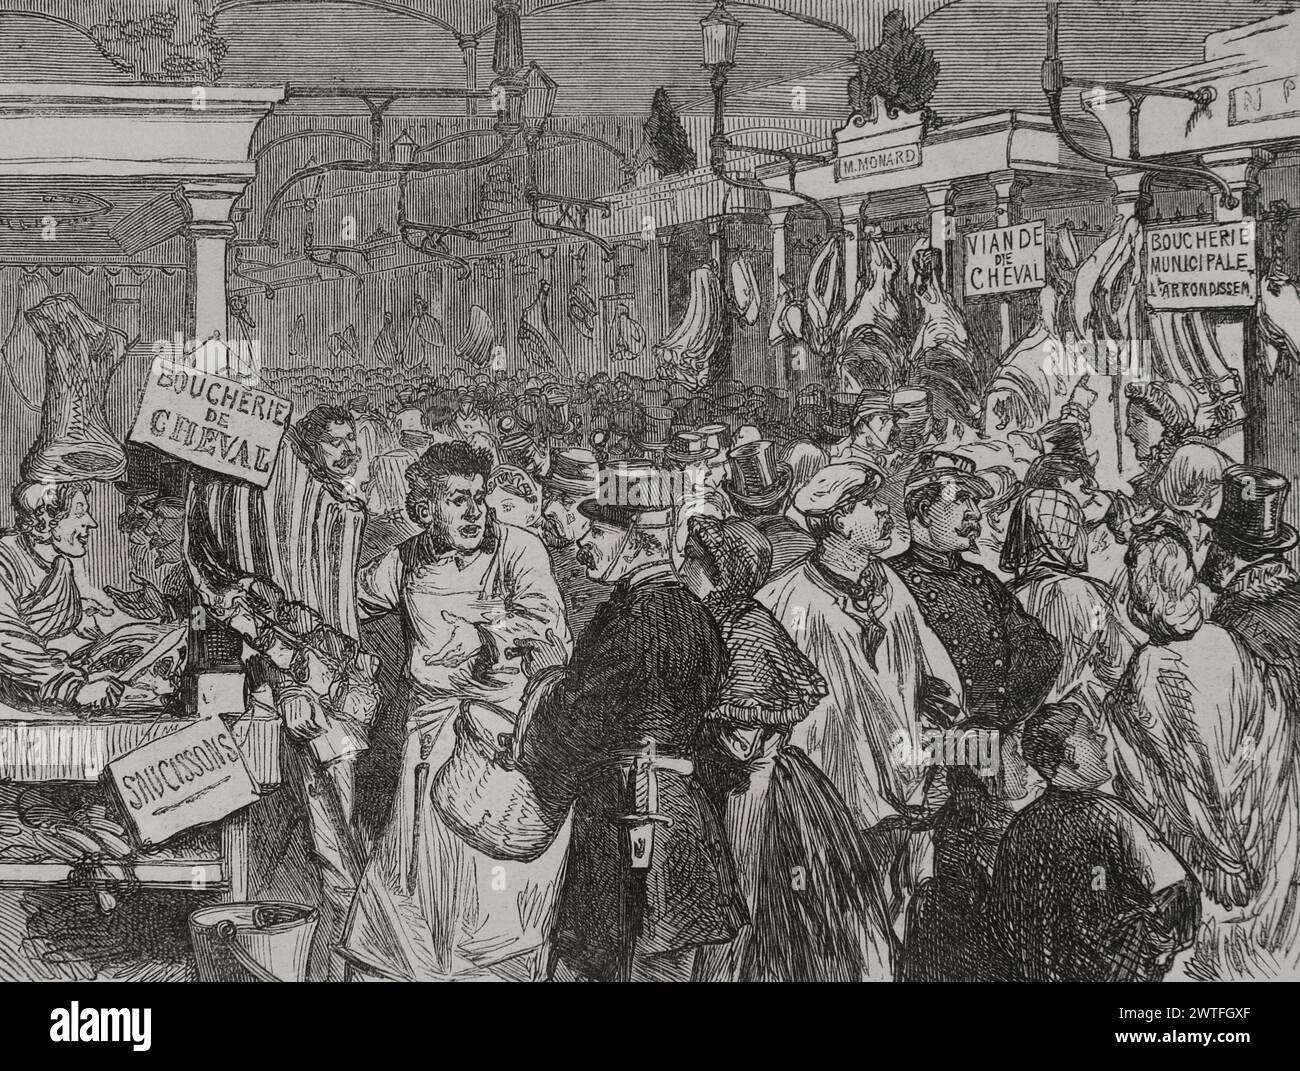 Franco-Prussian War (1870-1871). Siege of Paris (19 September 1870 to 28 January 1871). Meat market in Paris. Engraving. 'Historia de la Guerra de Francia y Prusia' (History of the War between France and Prussia). Volume II. Published in Barcelona, 1871. Stock Photo